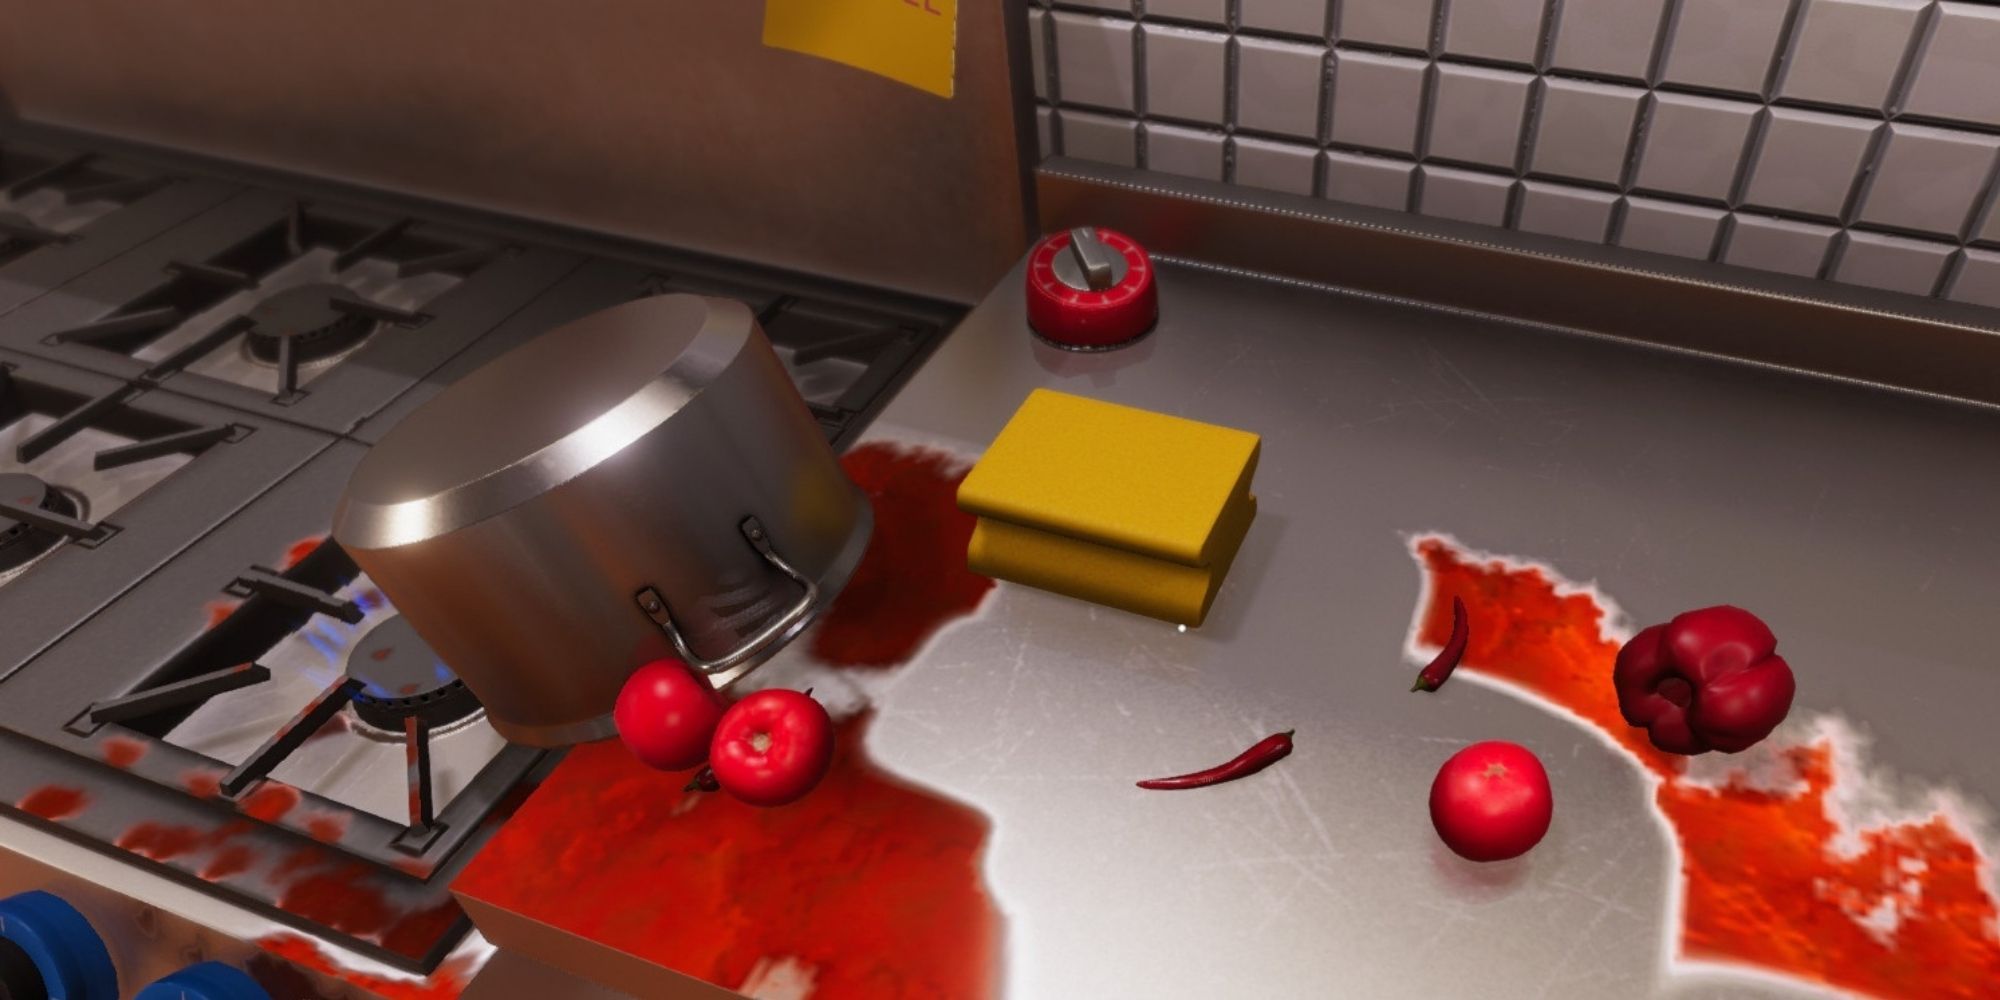 Spilled Sauce on Counter in Cooking Simulator